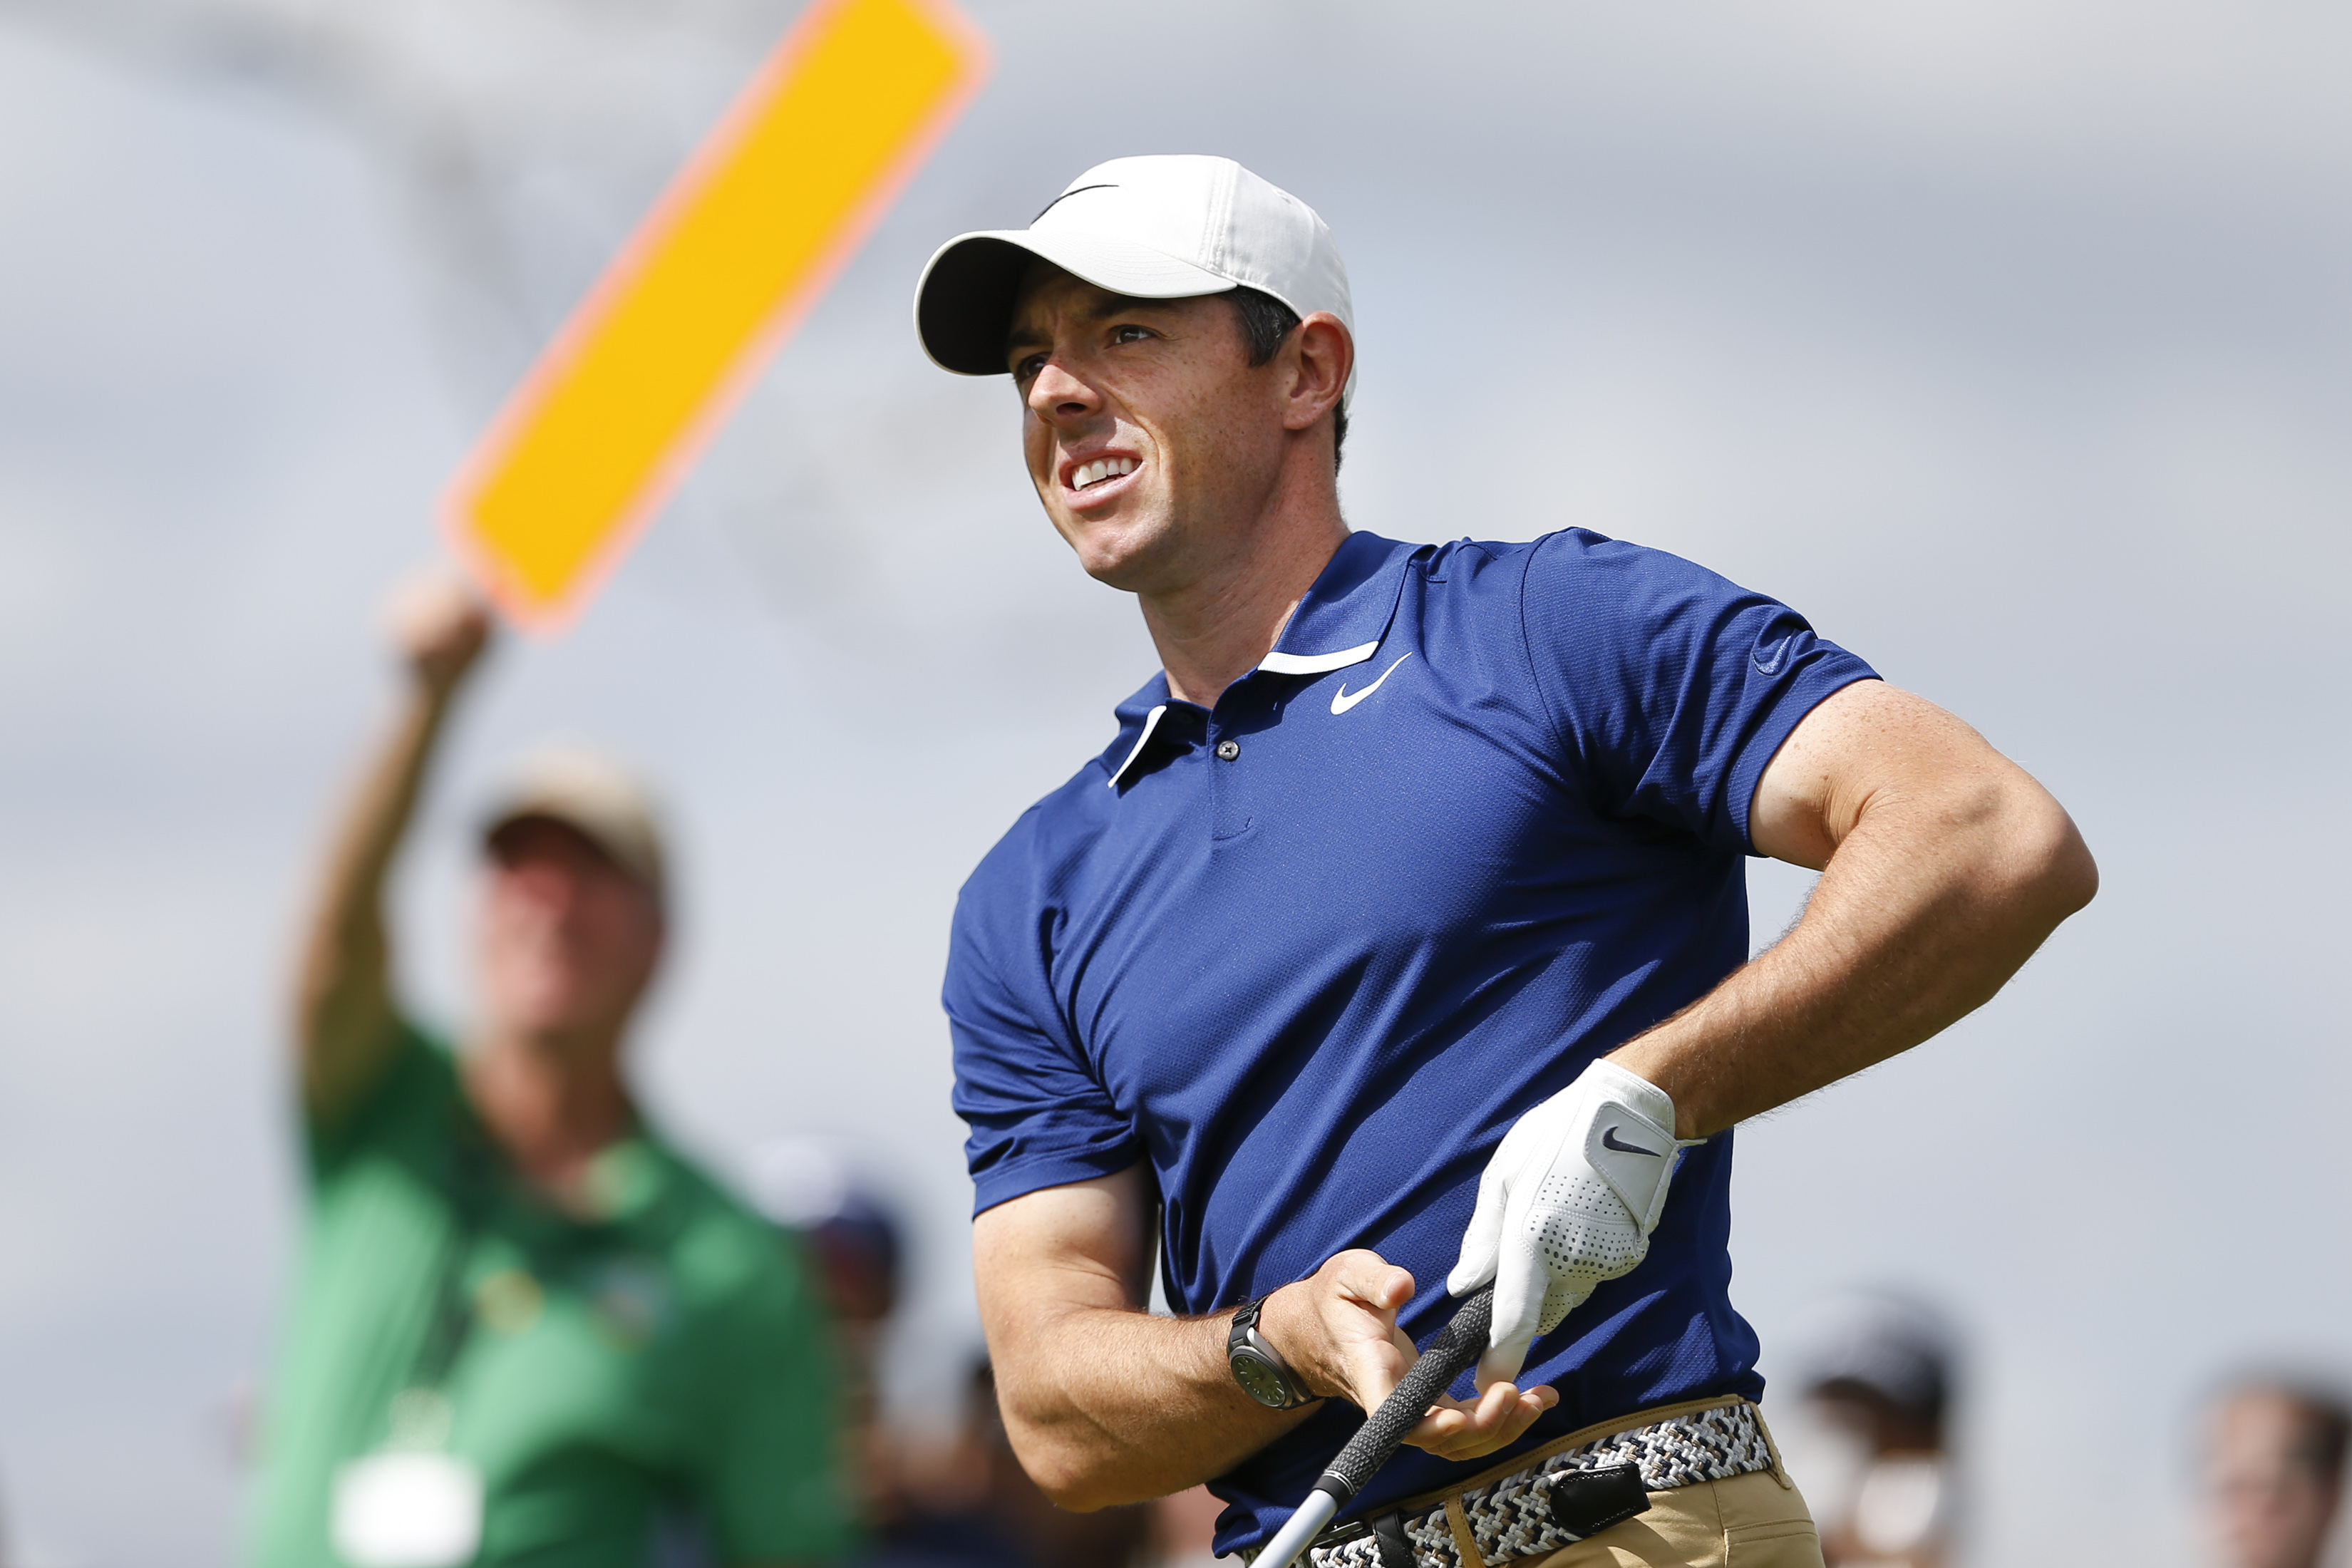 Rory McIlroy wants players and caddies to be tested for coronavirus